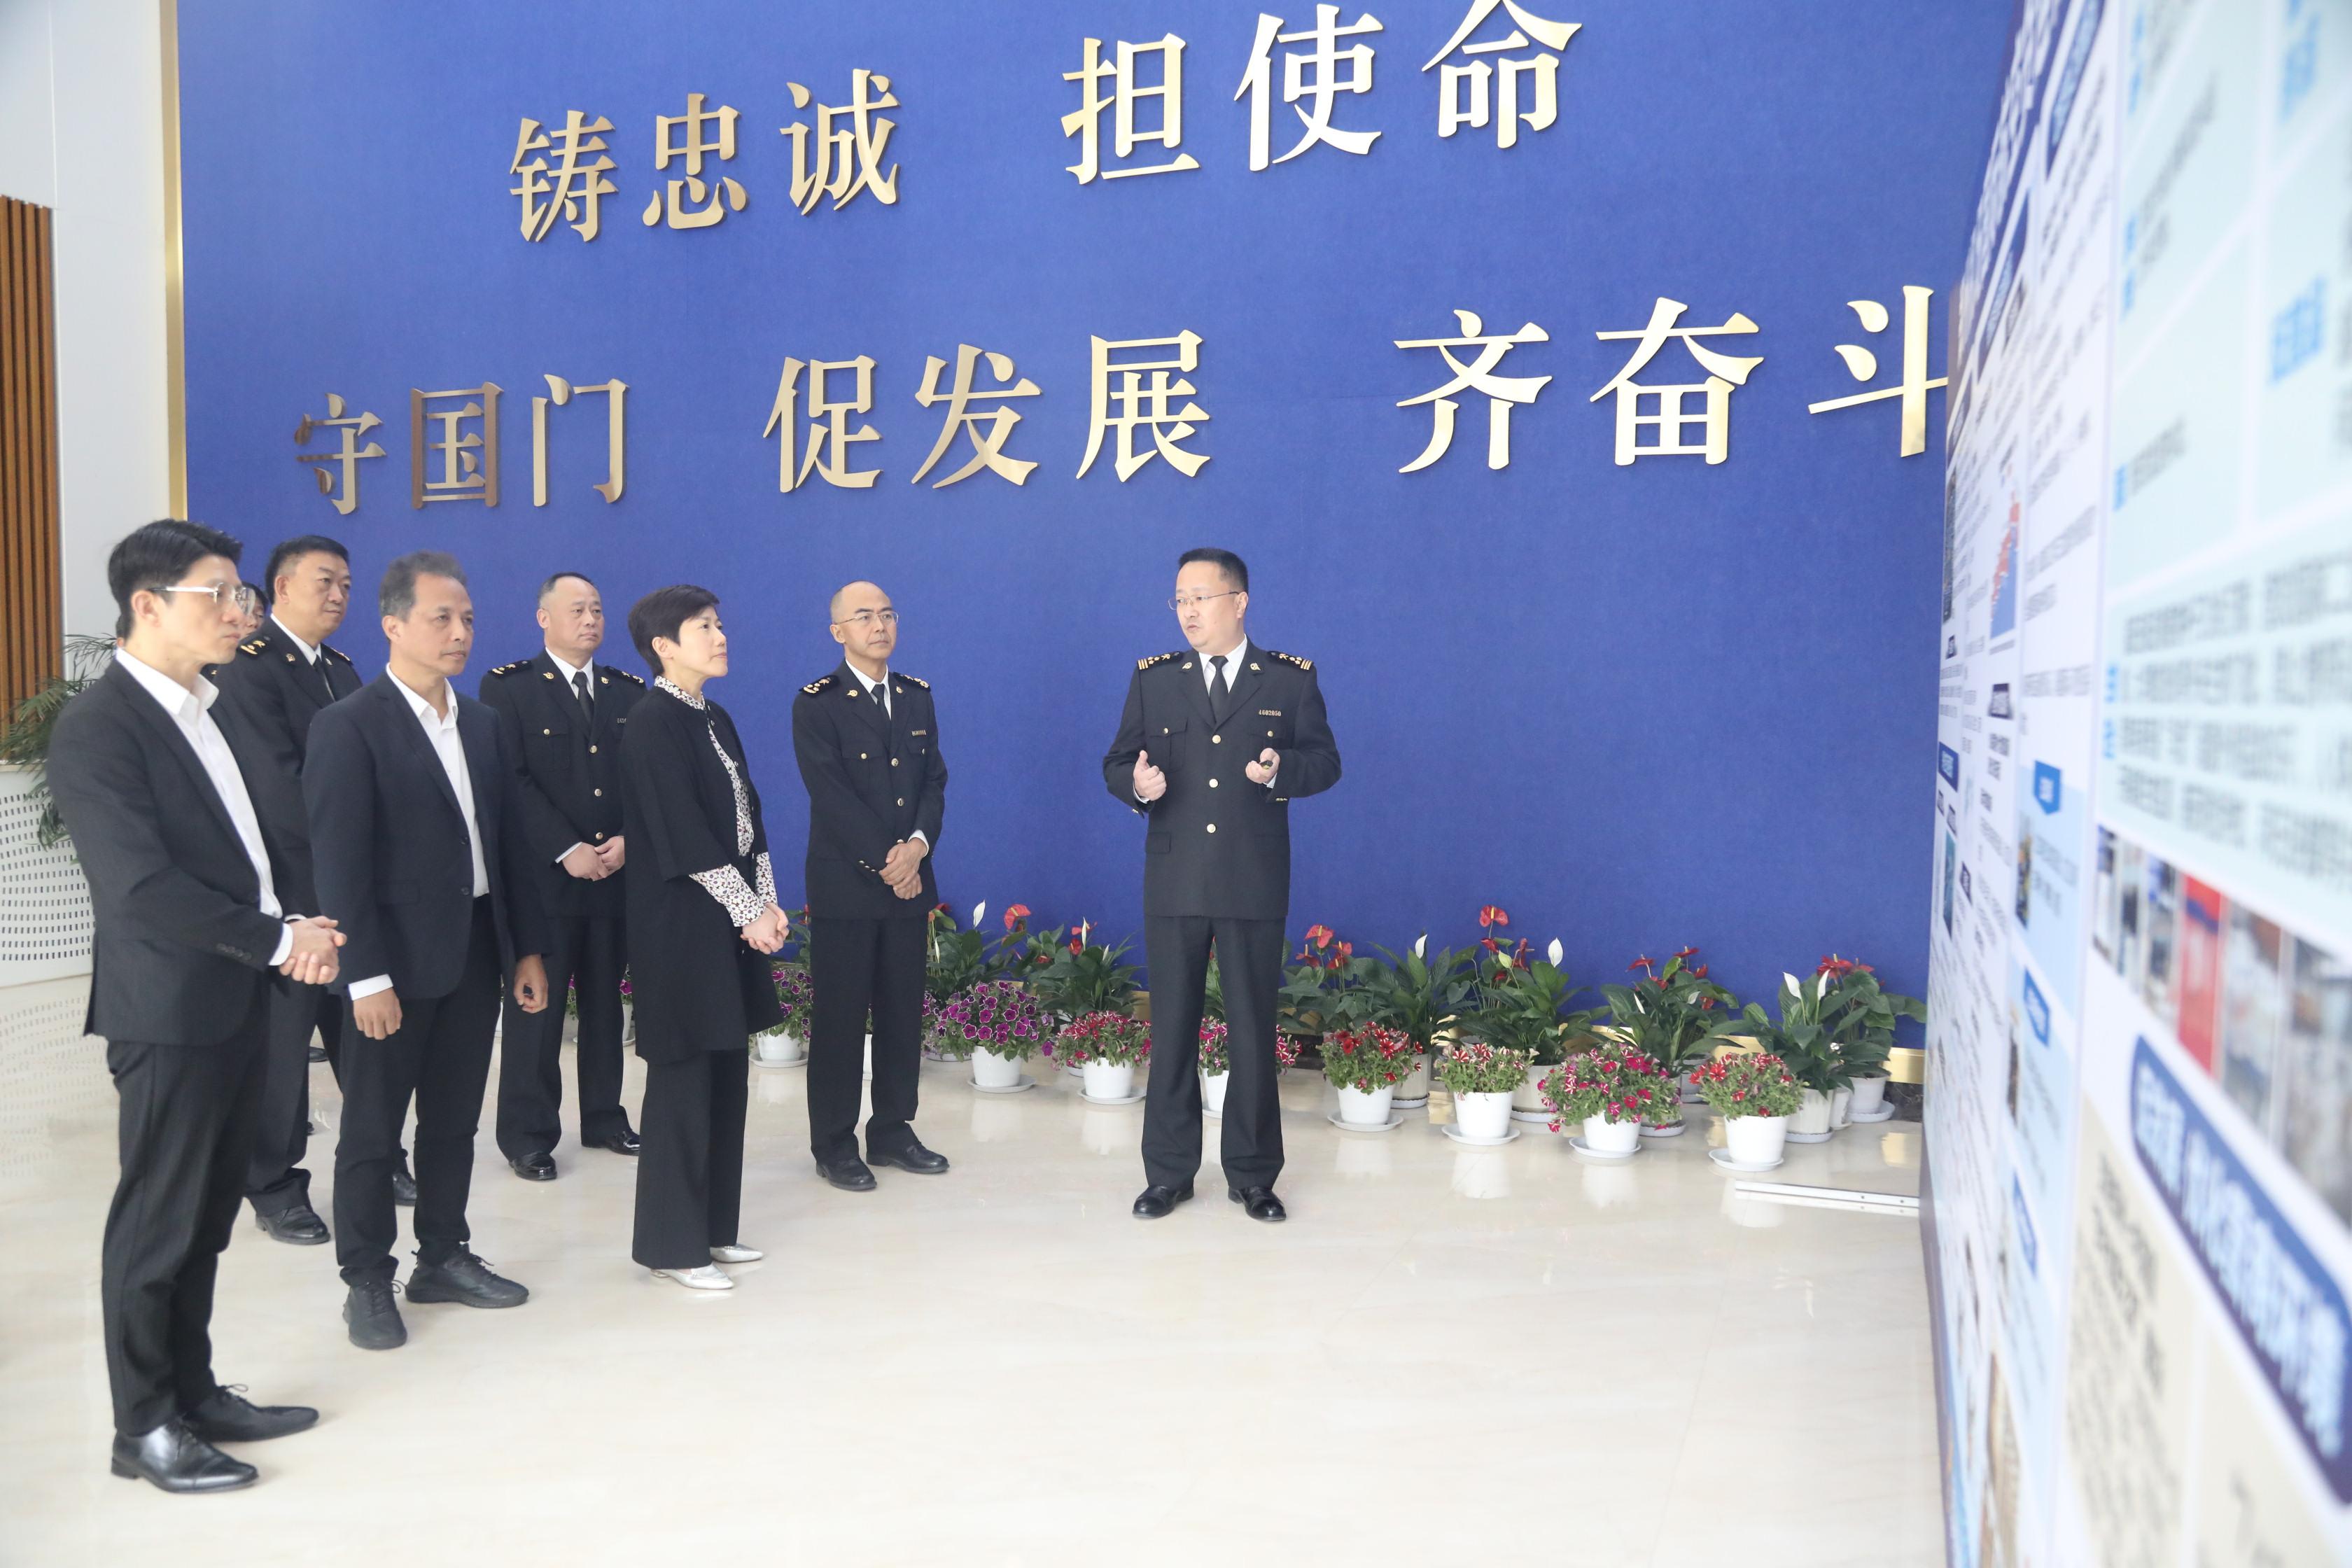 The Commissioner of Customs and Excise, Ms Louise Ho (front row, third left), today (April 9) led a delegation to visit Zhengzhou, Henan Province. Photo shows Ms Ho, accompanied by the Director General in Zhengzhou Customs District, Mr Wang Jun (front row, second right), and  the Deputy Director General of the Guangdong Sub-Administration of the General Administration of Customs of the People's Republic of China, Mr Feng Guoqing (front row, second left), visiting Zhengzhou Xinzheng International Airport today to study the latest development of international air cargo logistics.